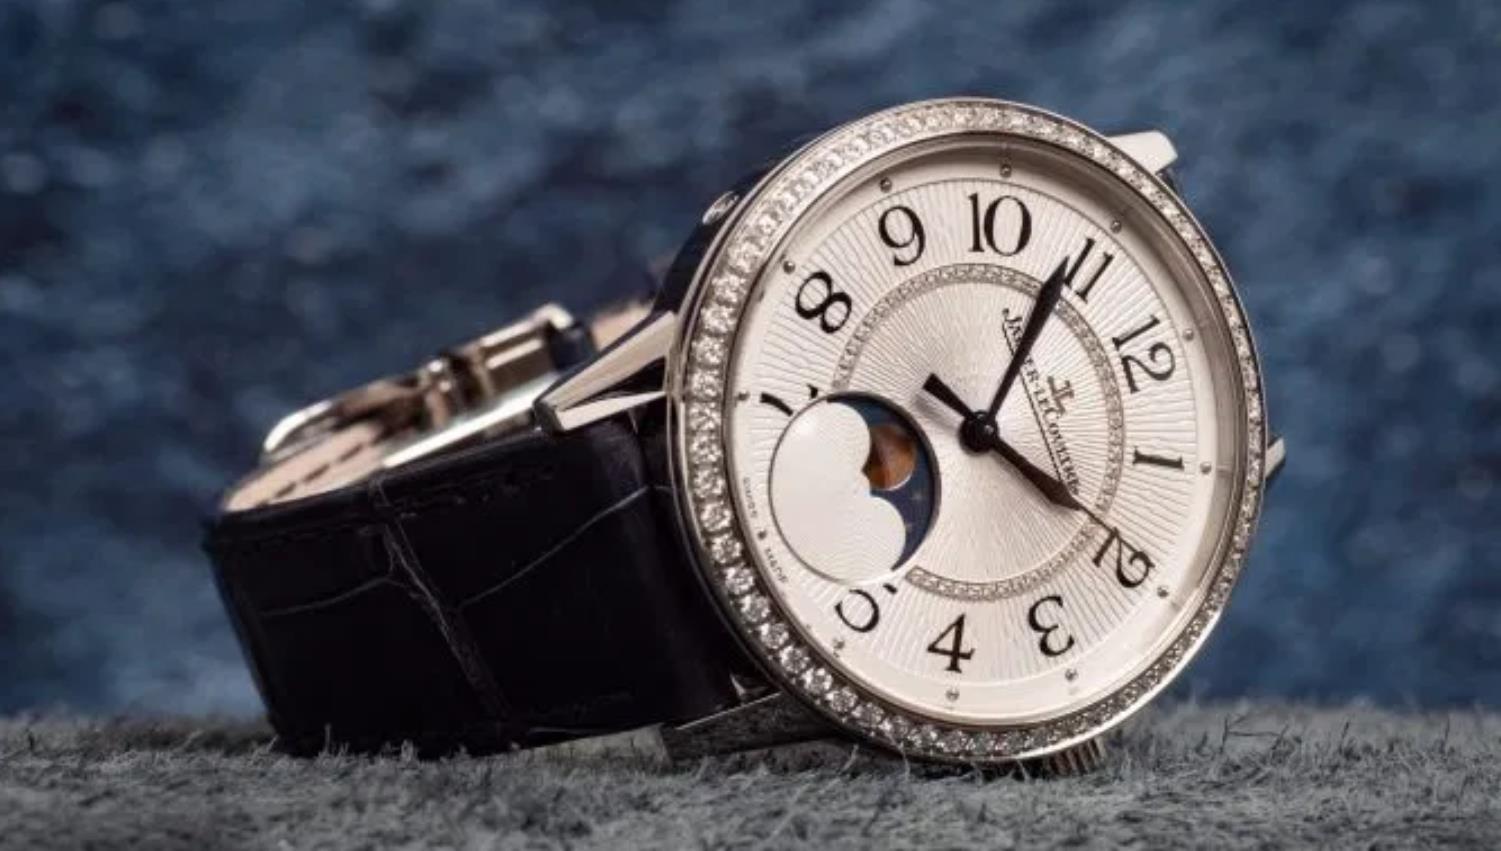 The white dial fake watch has a moon phase.